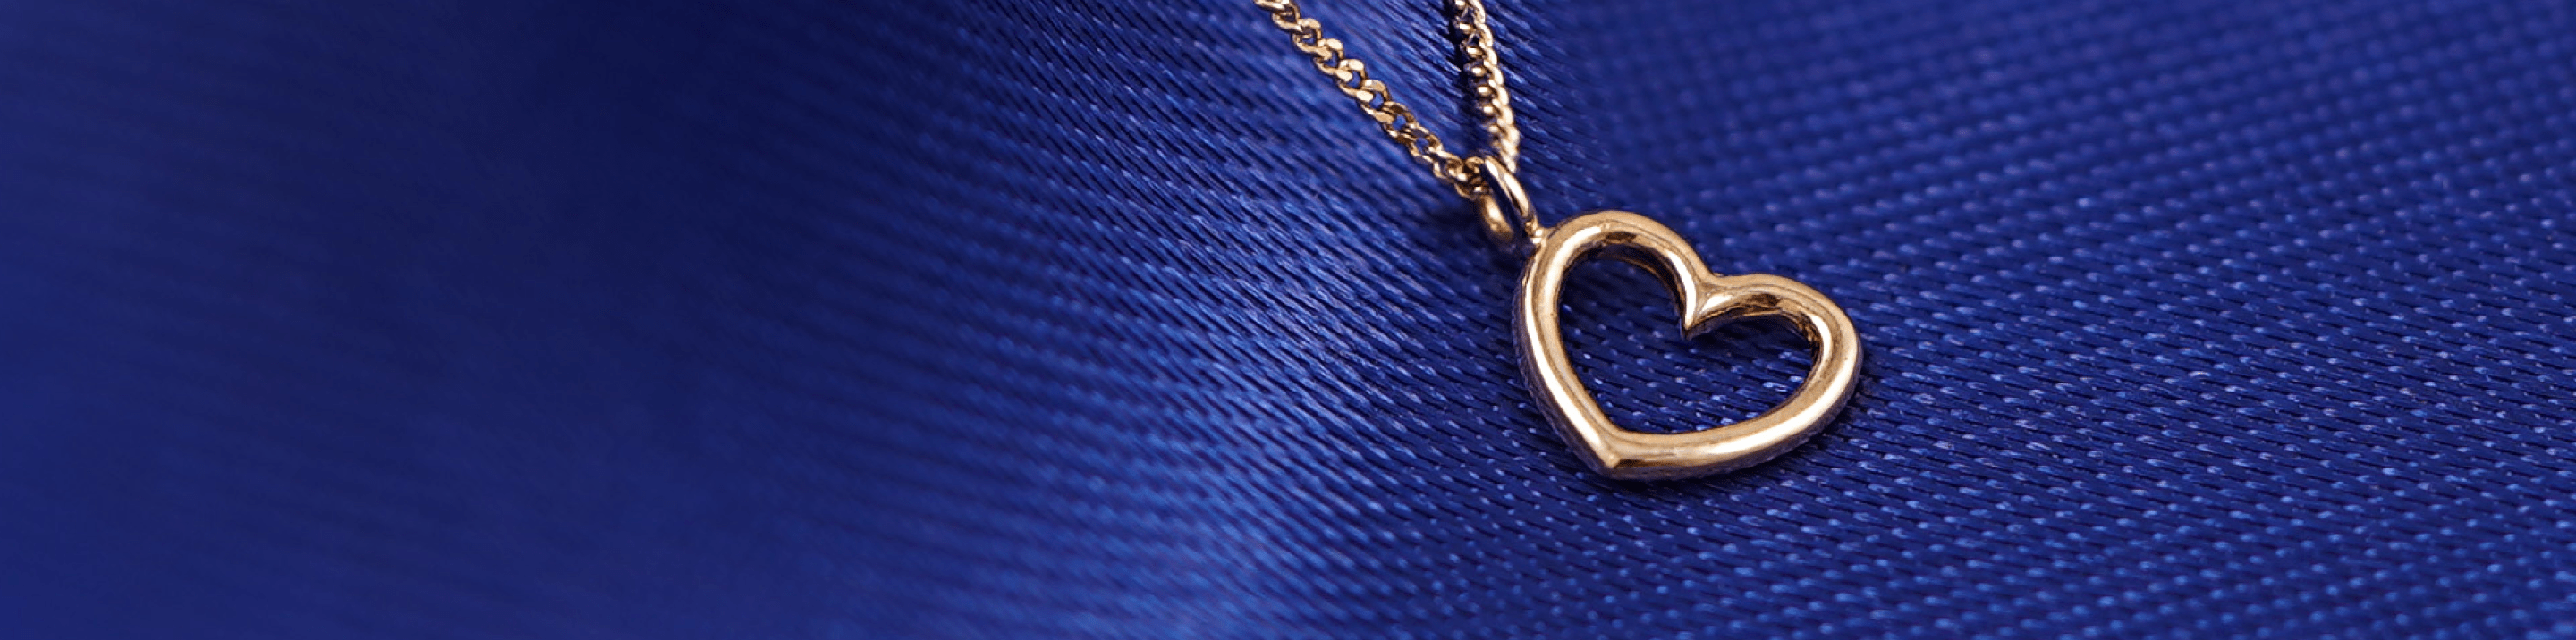 A solid 14k yellow gold Open Heart Charm on an Essential chain resting on a blue cloth background